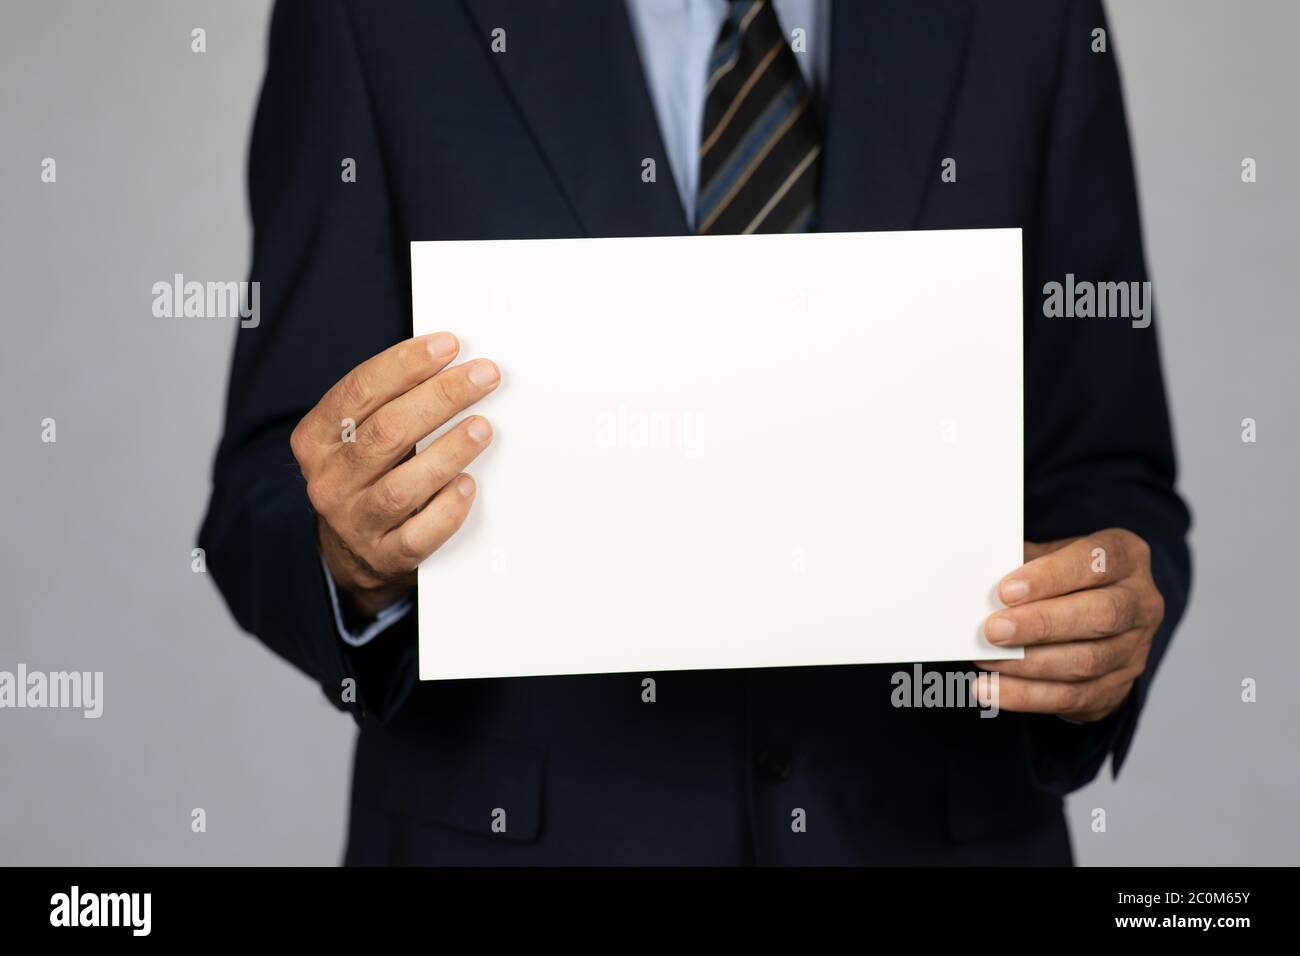 Businessman in suit holding an empty paper in front of him. Selective focus on foreground. Stock Photo